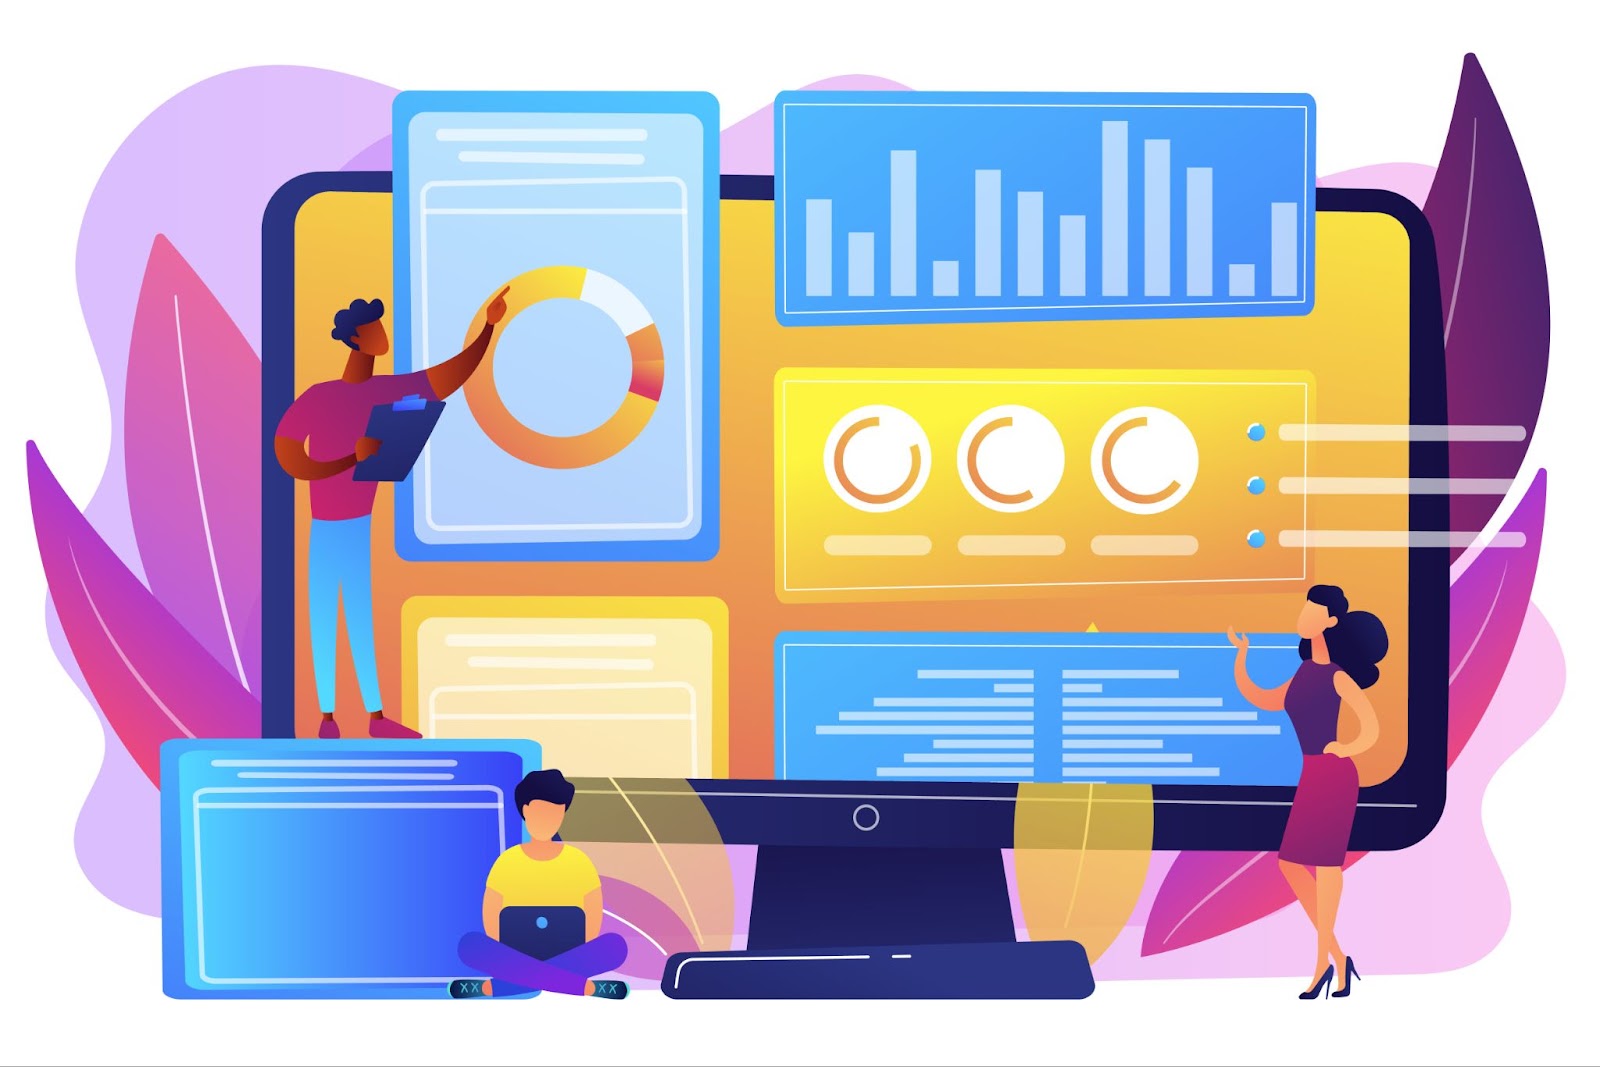 Colorful vector graphic of diverse people working with oversized digital devices, illustrating collaboration and data management in a digital workspace.